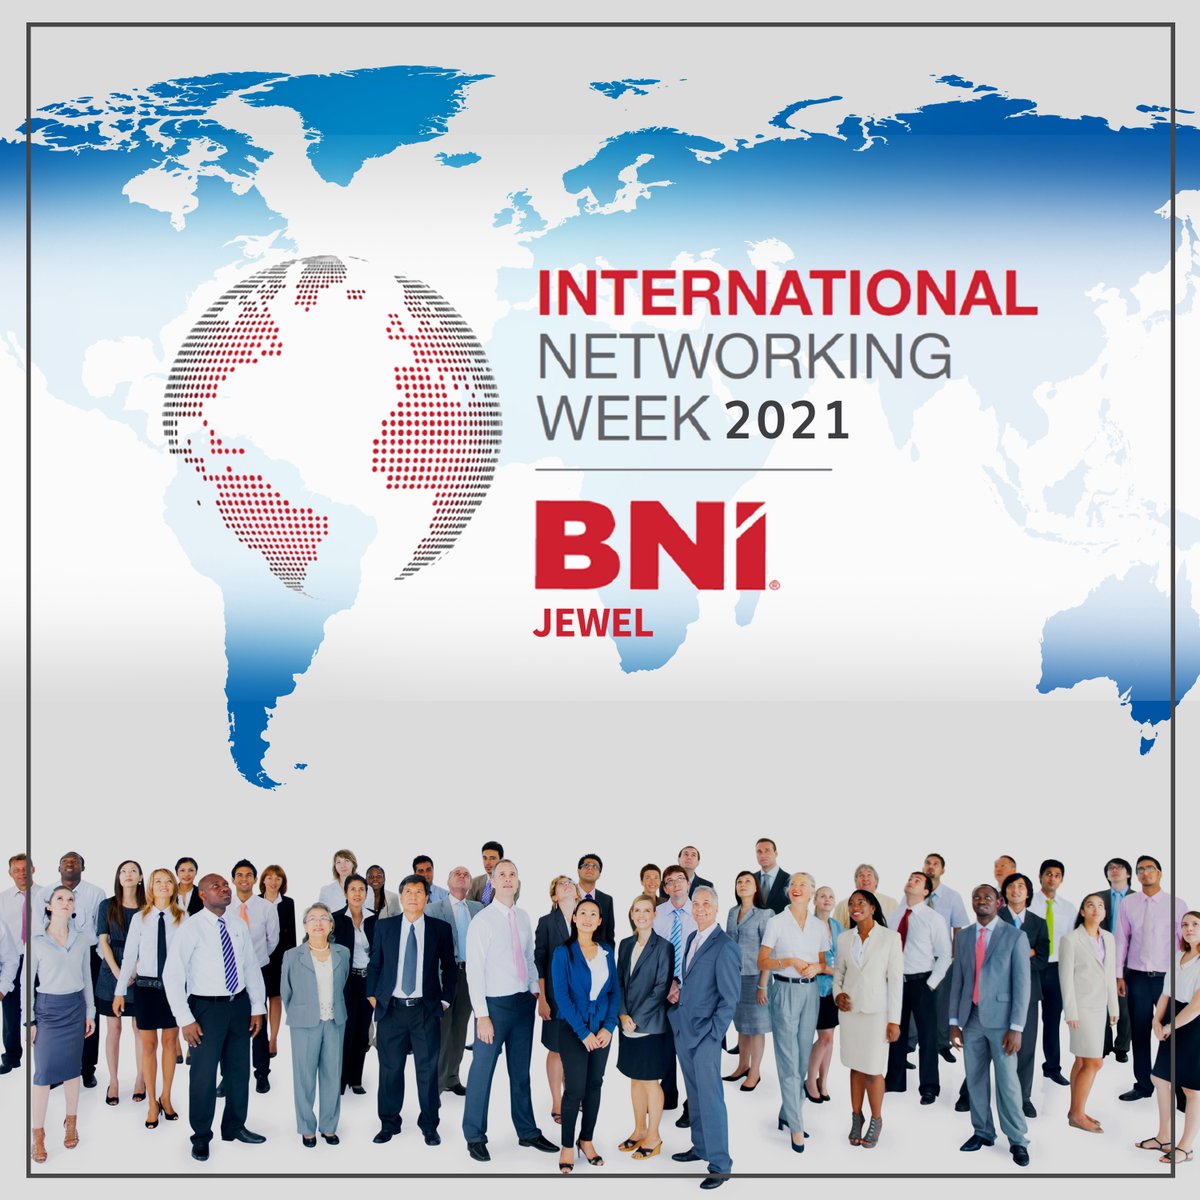 Welcome to the 14th Annual International Networking Week®

BNI Founder & Chief Visionary Officer 'Dr. Ivan Misner' kicks-off International Networking Week 2021 by giving his thanks to BNI Members and Leaders from around the world. 

#NetworkingWeek #inw2021 #bnijewel